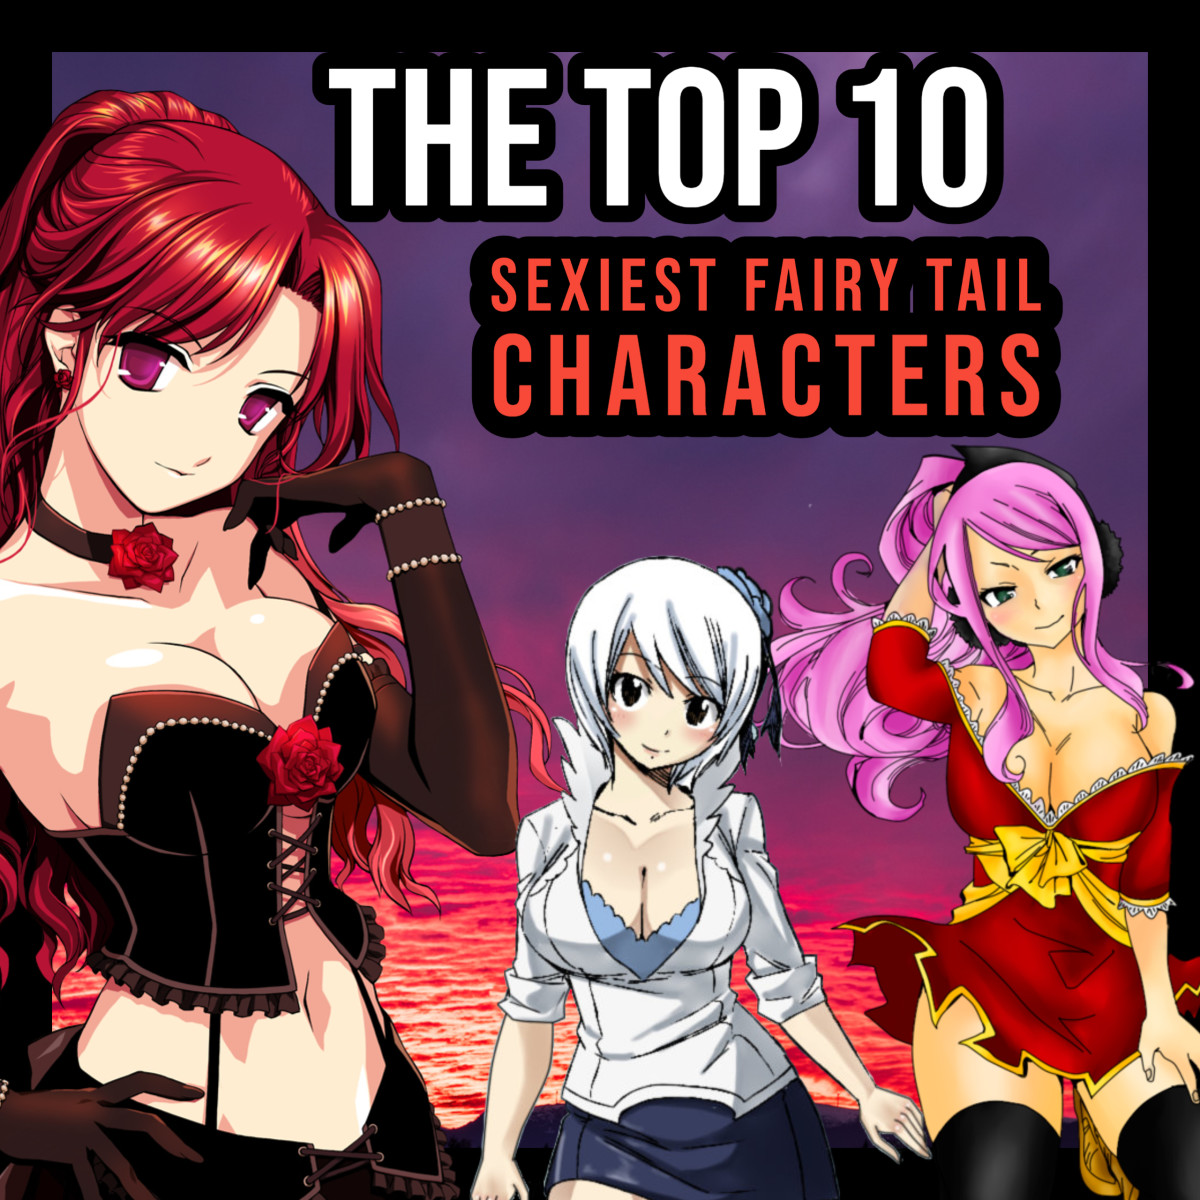 From Meredy to Erza Scarlet, this article ranks the 10 sexiest Fairy Tail characters.